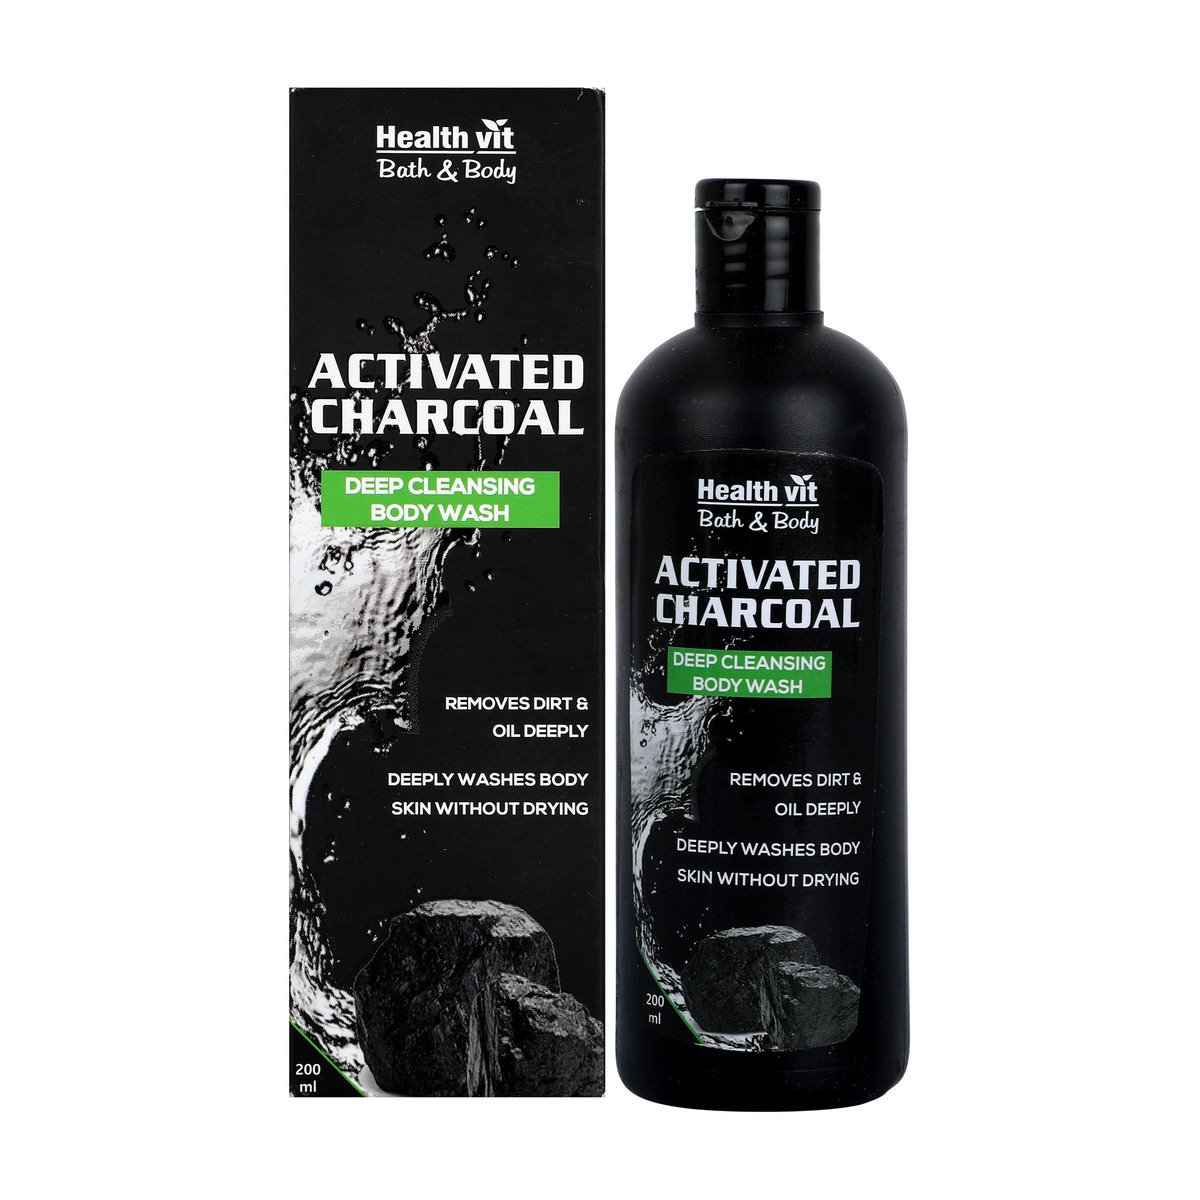 HealthVit Activated Charcoal Deep Cleansing Body Wash, 200 ml